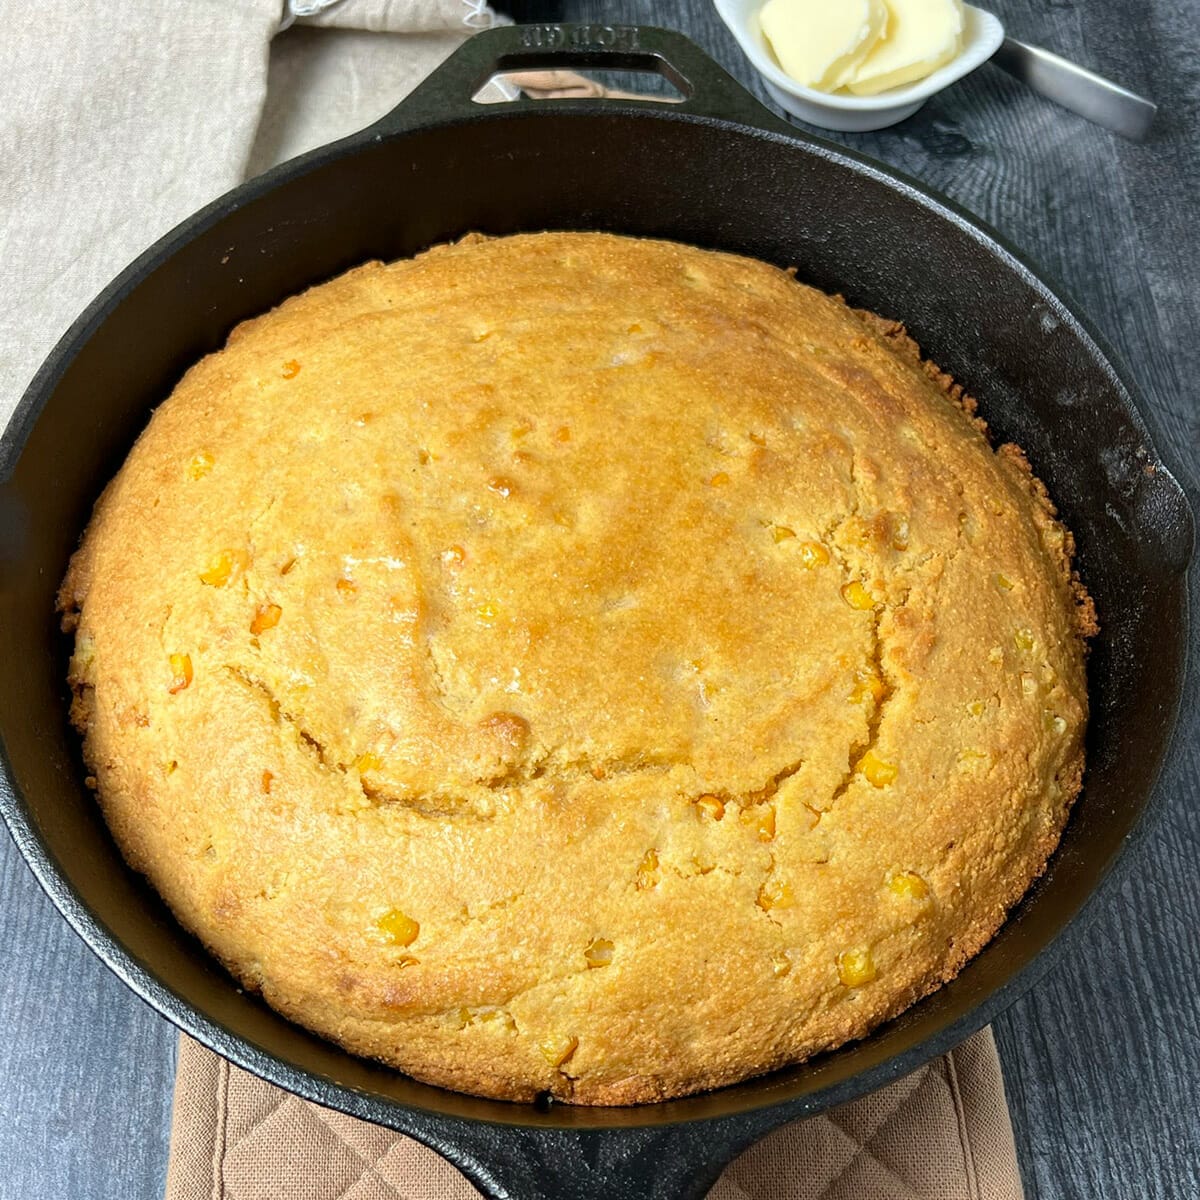 A recent cornbread skillet restoration. Looking for other ideas on what to  cook! : r/castiron